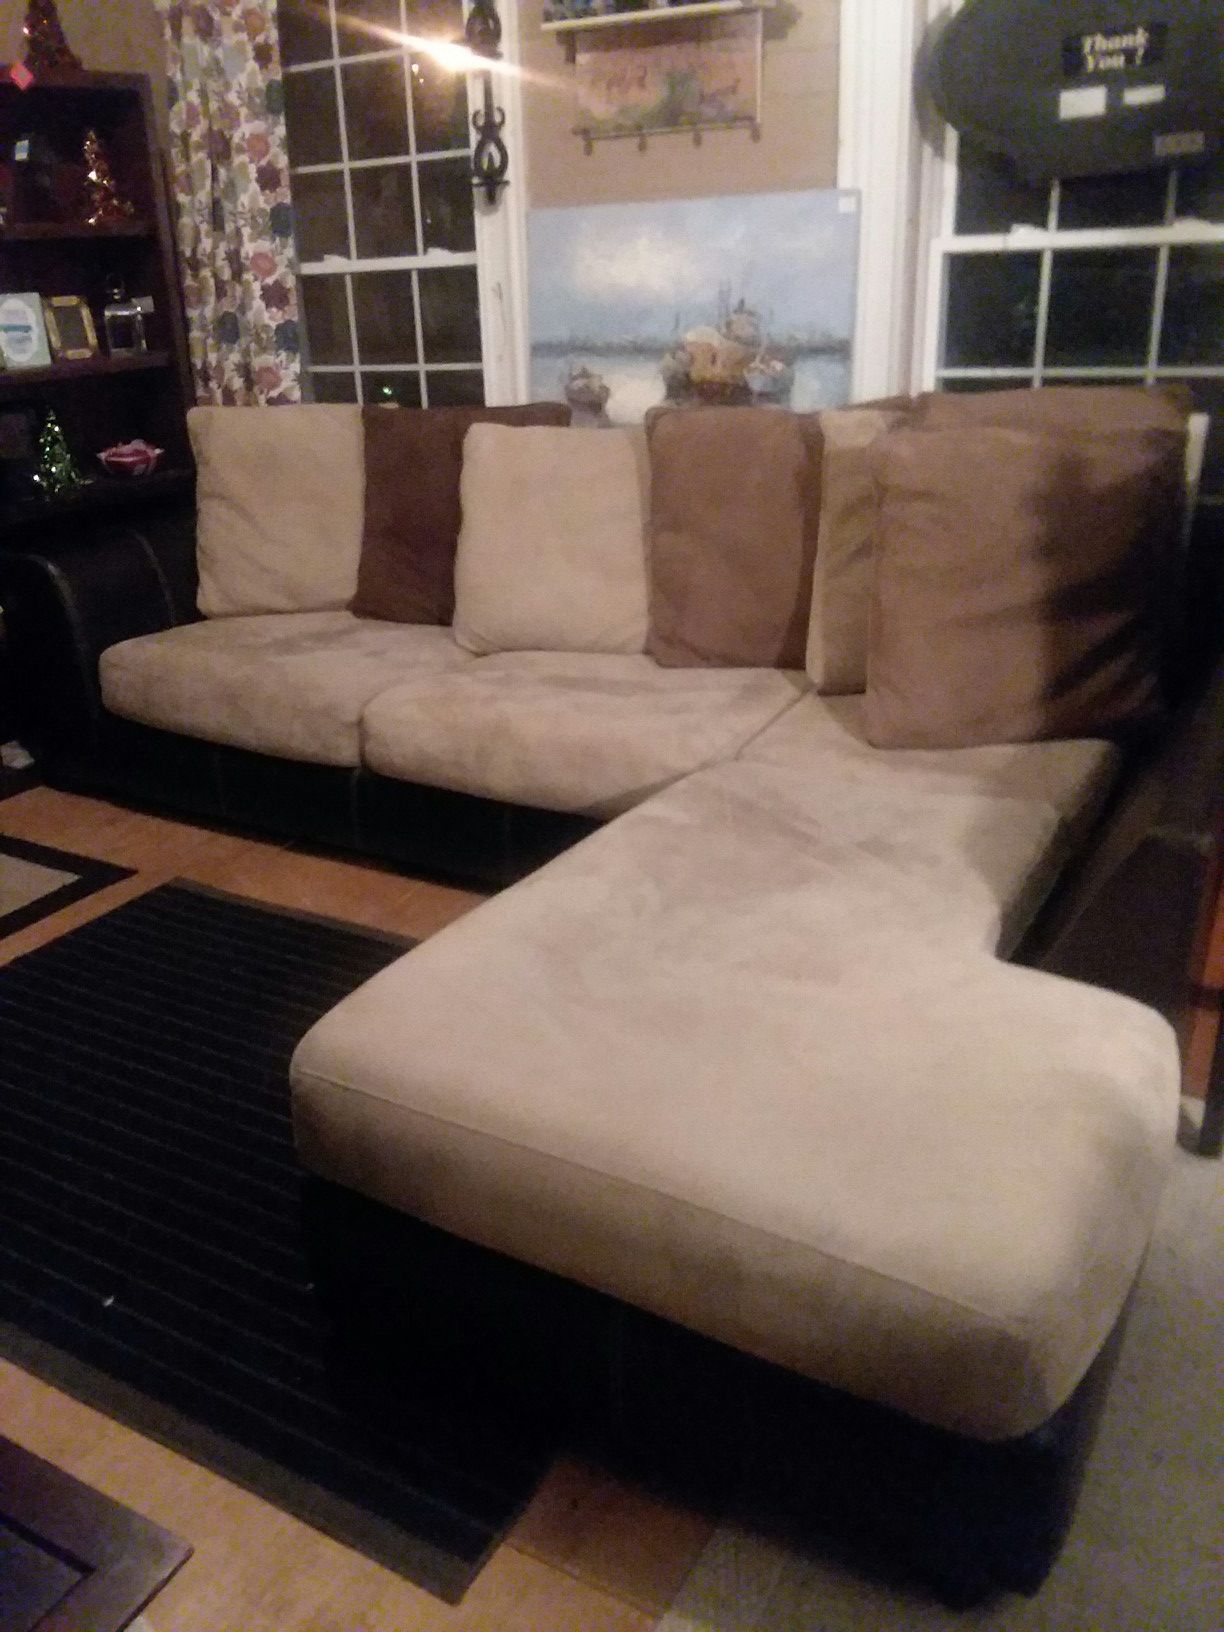 Cumberland thrift store 2 pc sectional with chaise lounger